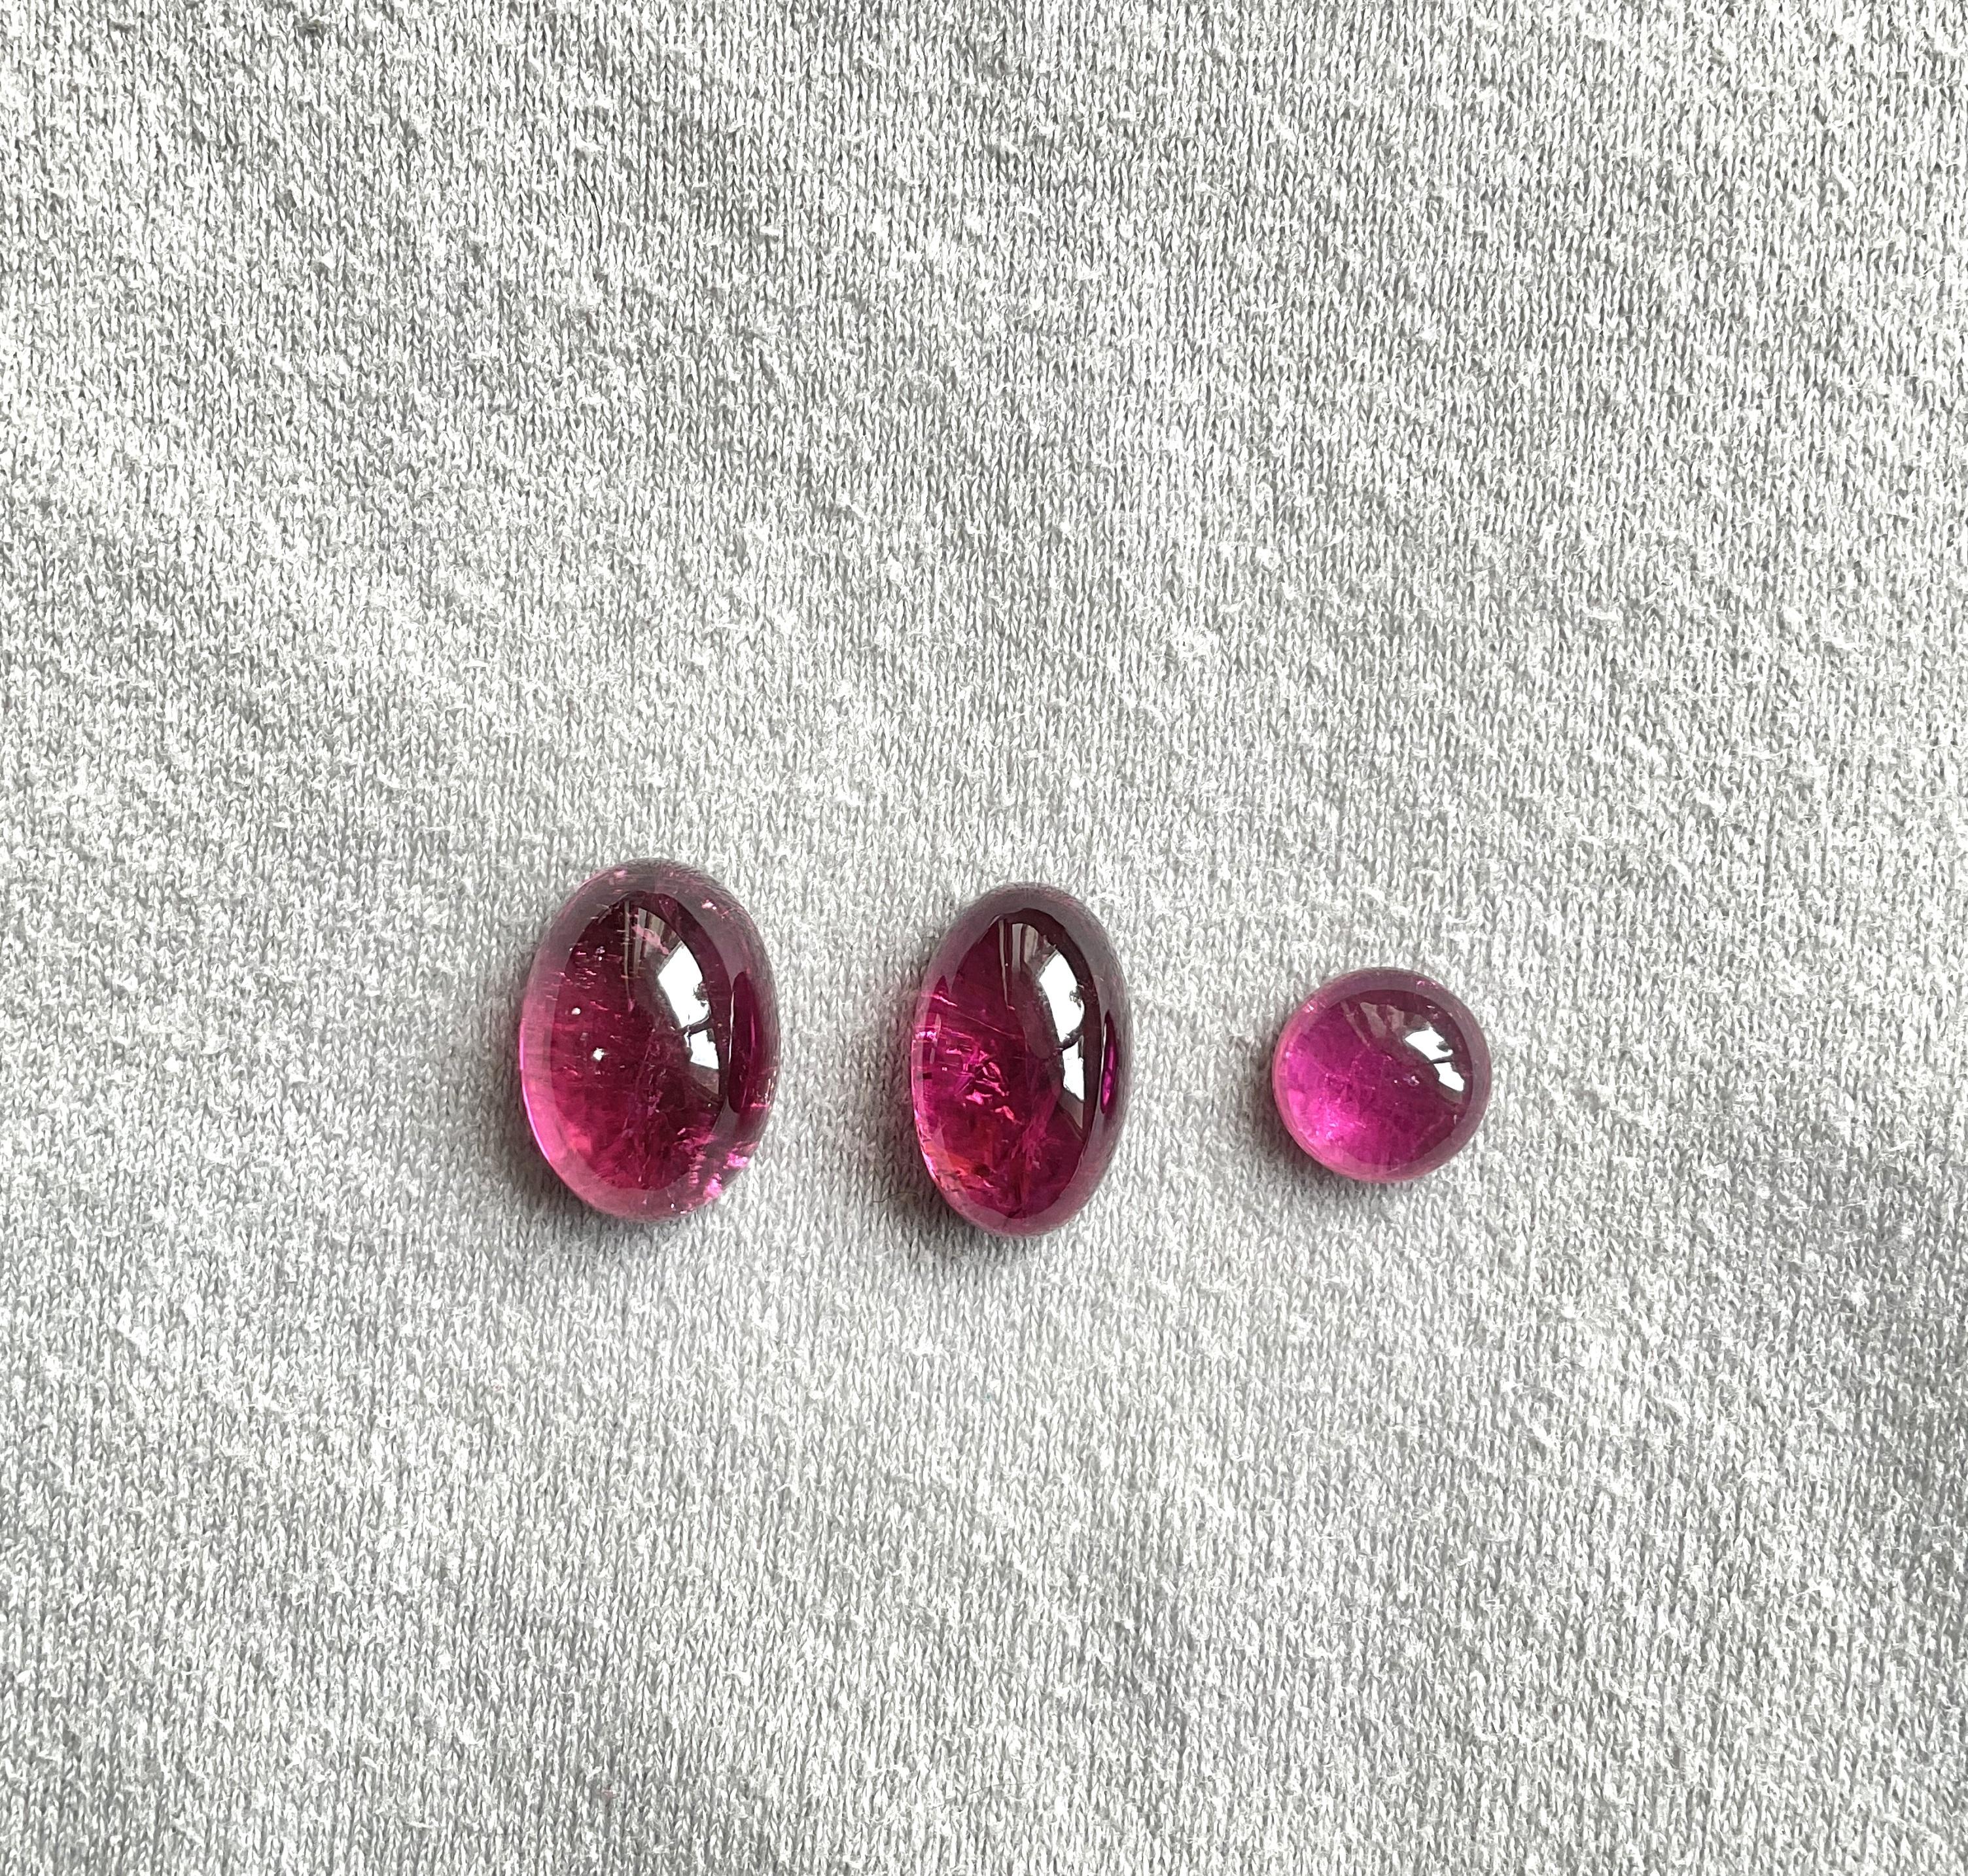 25.21 Carats Top Quality Rubellite Tourmaline Cabochon 3 Pieces Natural Gemstone For Sale 2